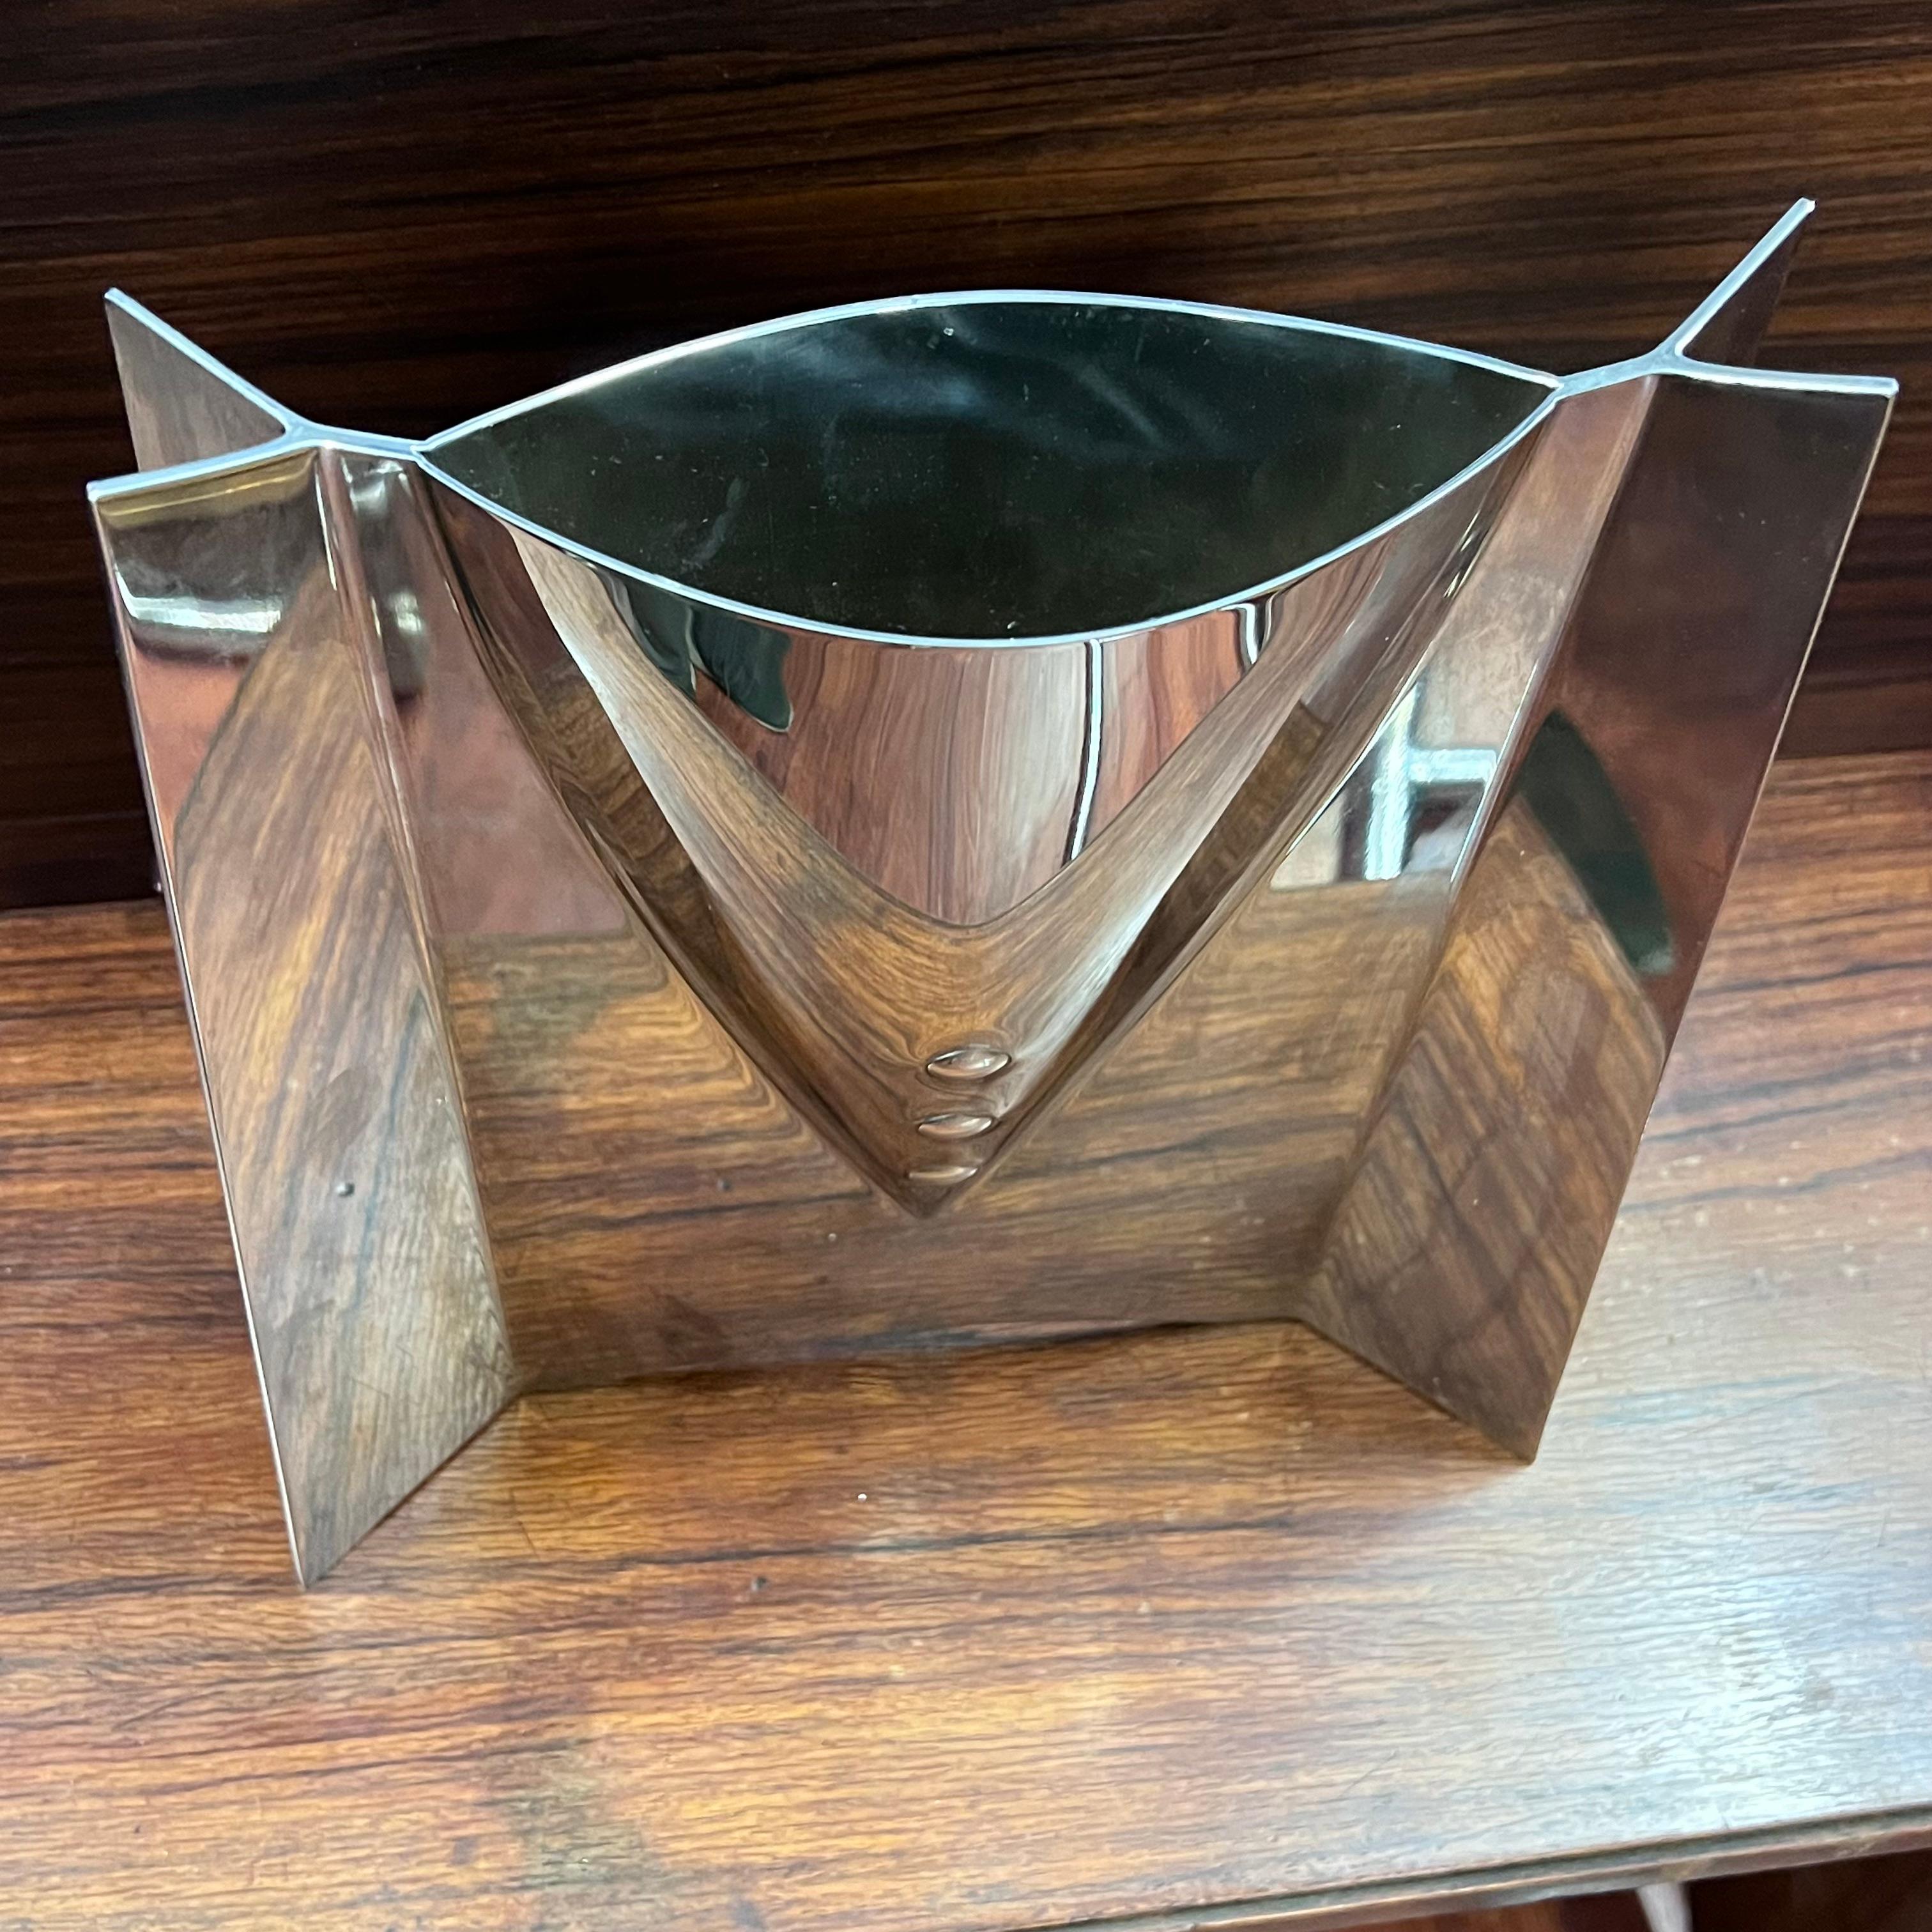 Particular steel vase, made by Davorin Horvat on commission for Zepter.
Probably ordered by the company to give as a prize or gift.

